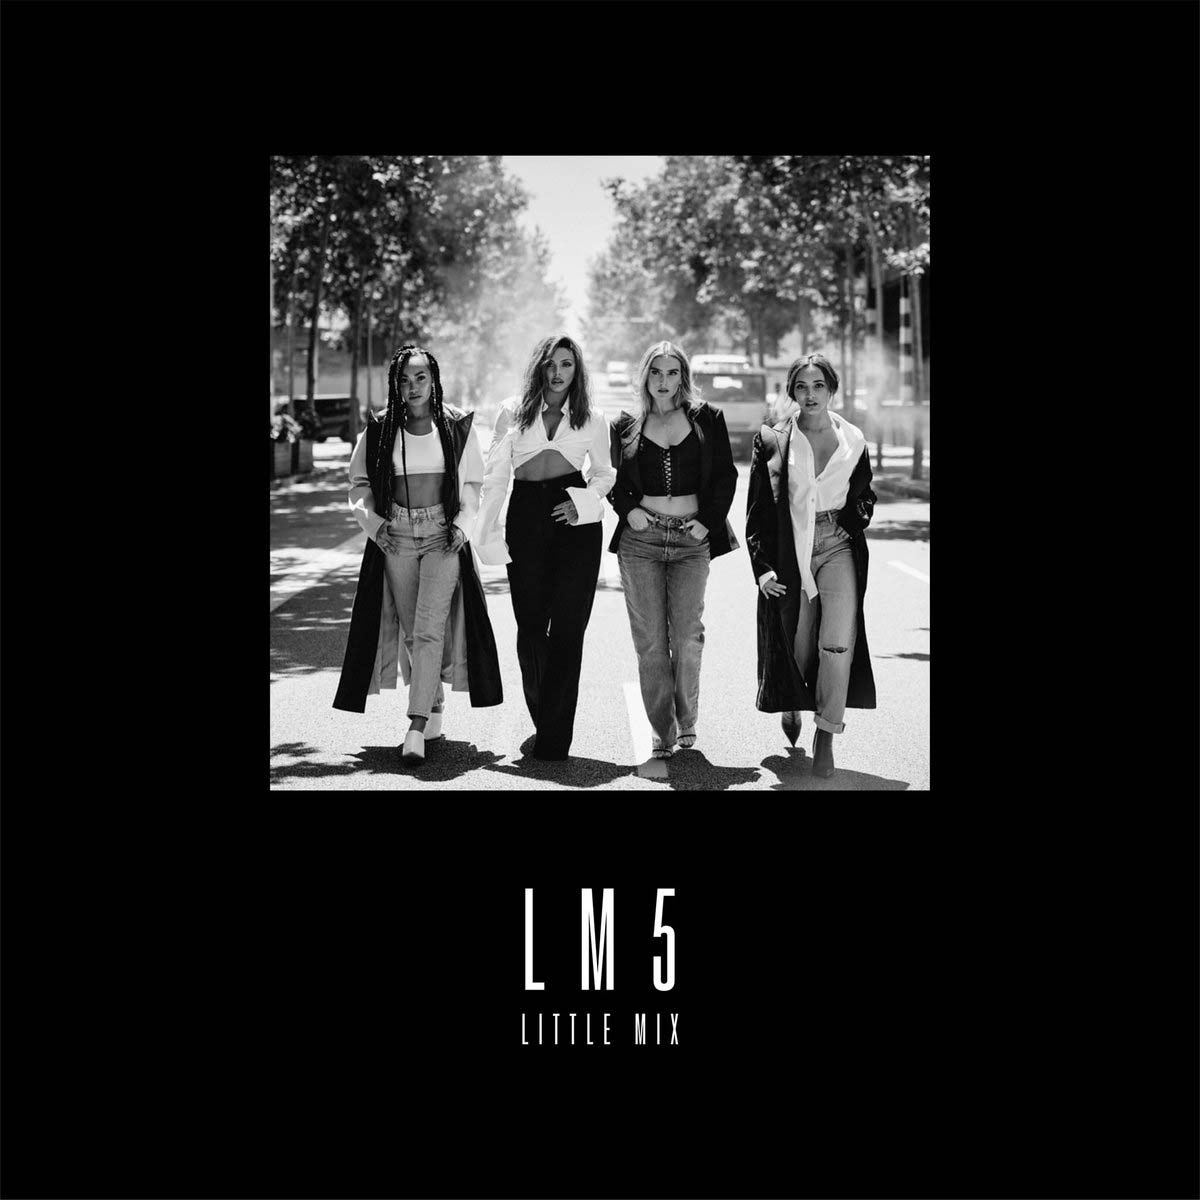 Little Mix - LM5 deluxe edition